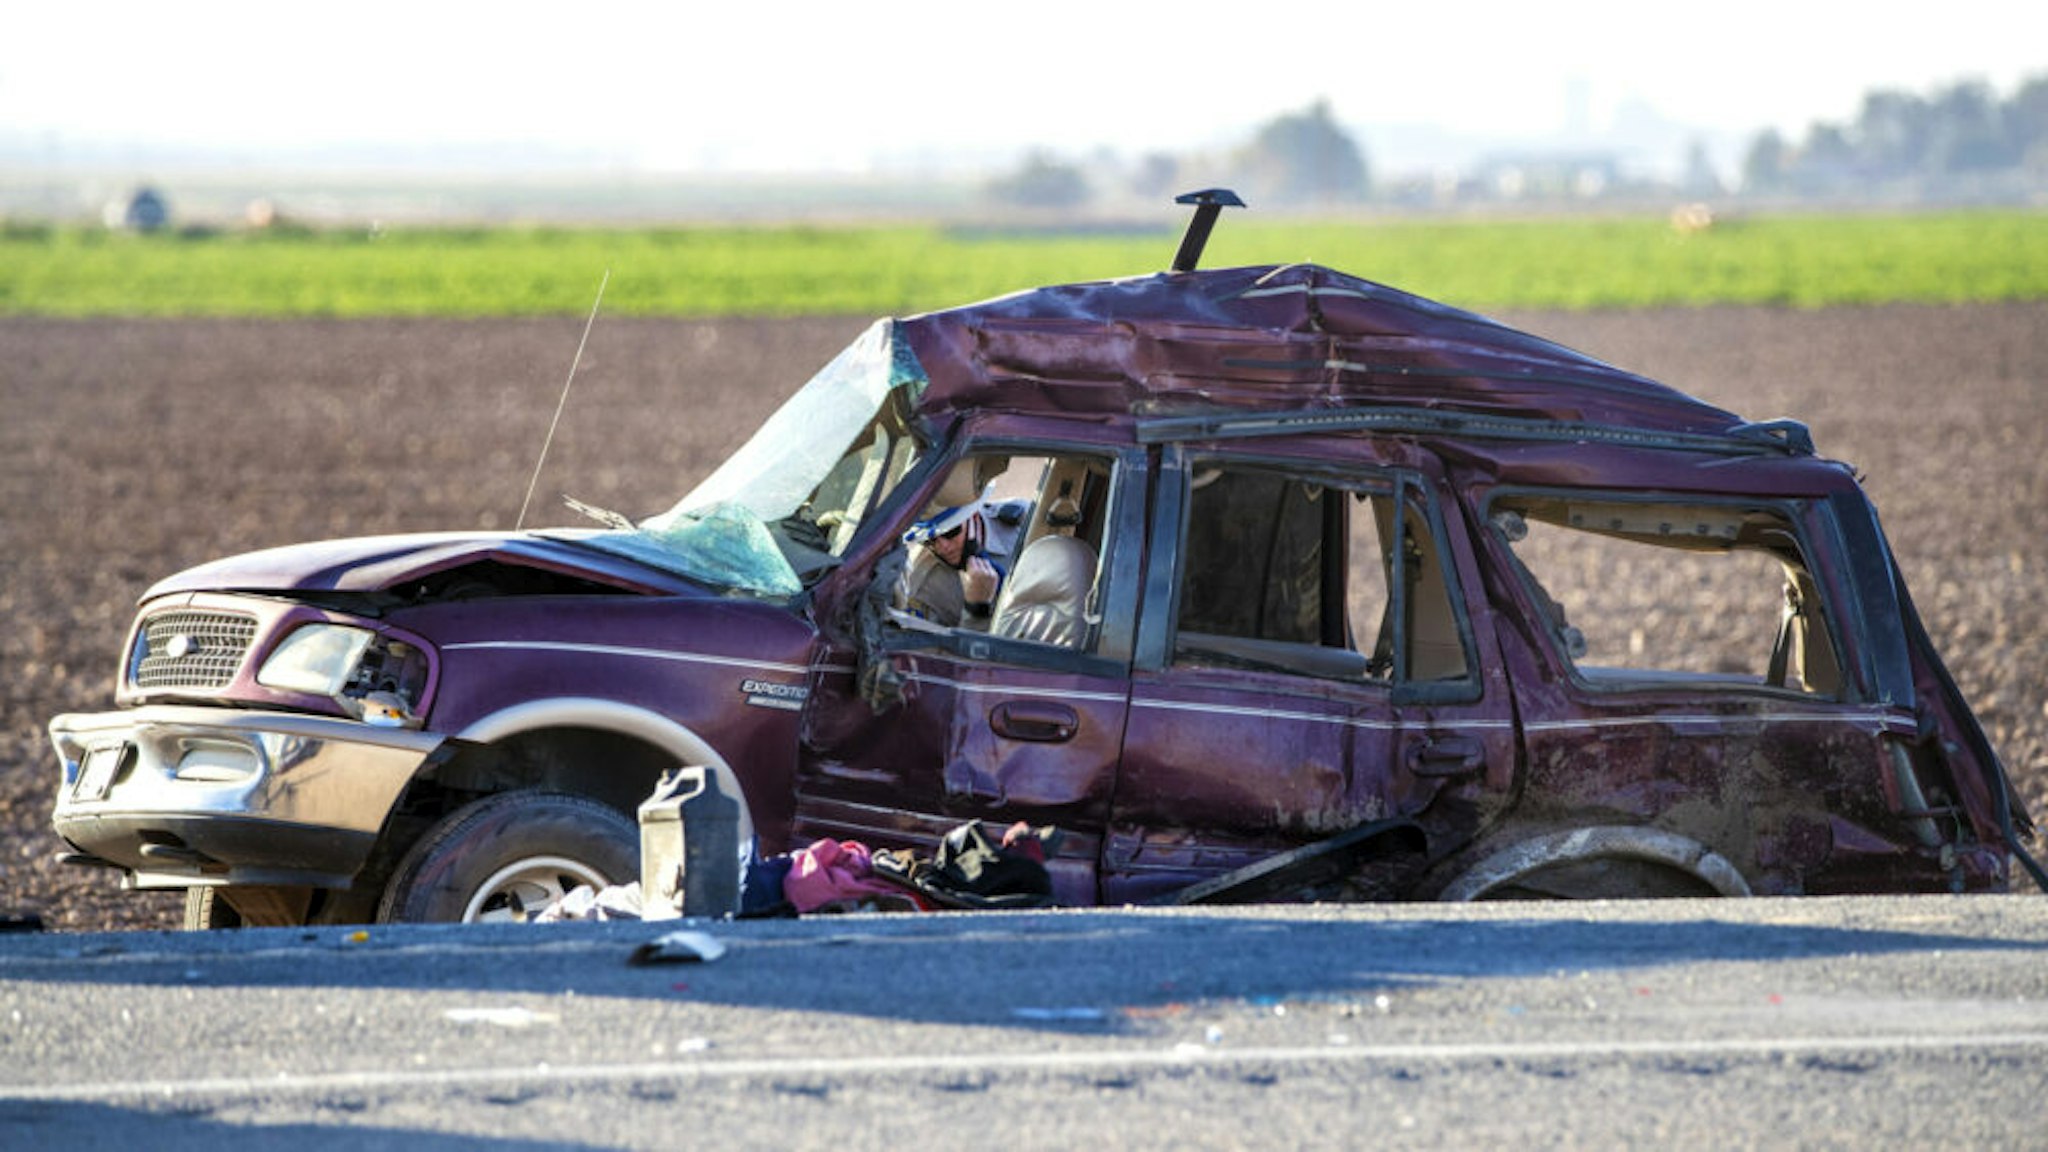 HOLTVILLE, CA - MARCH 2, 2021: A CHP officer looks inside a mangled SUV which was carrying 25 people when it collided with a semi-truck killing 13 on Highway 115 near the Mexican border on March 2, 2021 in Holtville, California. All the back seats had beens stripped form the vehicle. The passengers in the SUV ranged in age form 15-53.